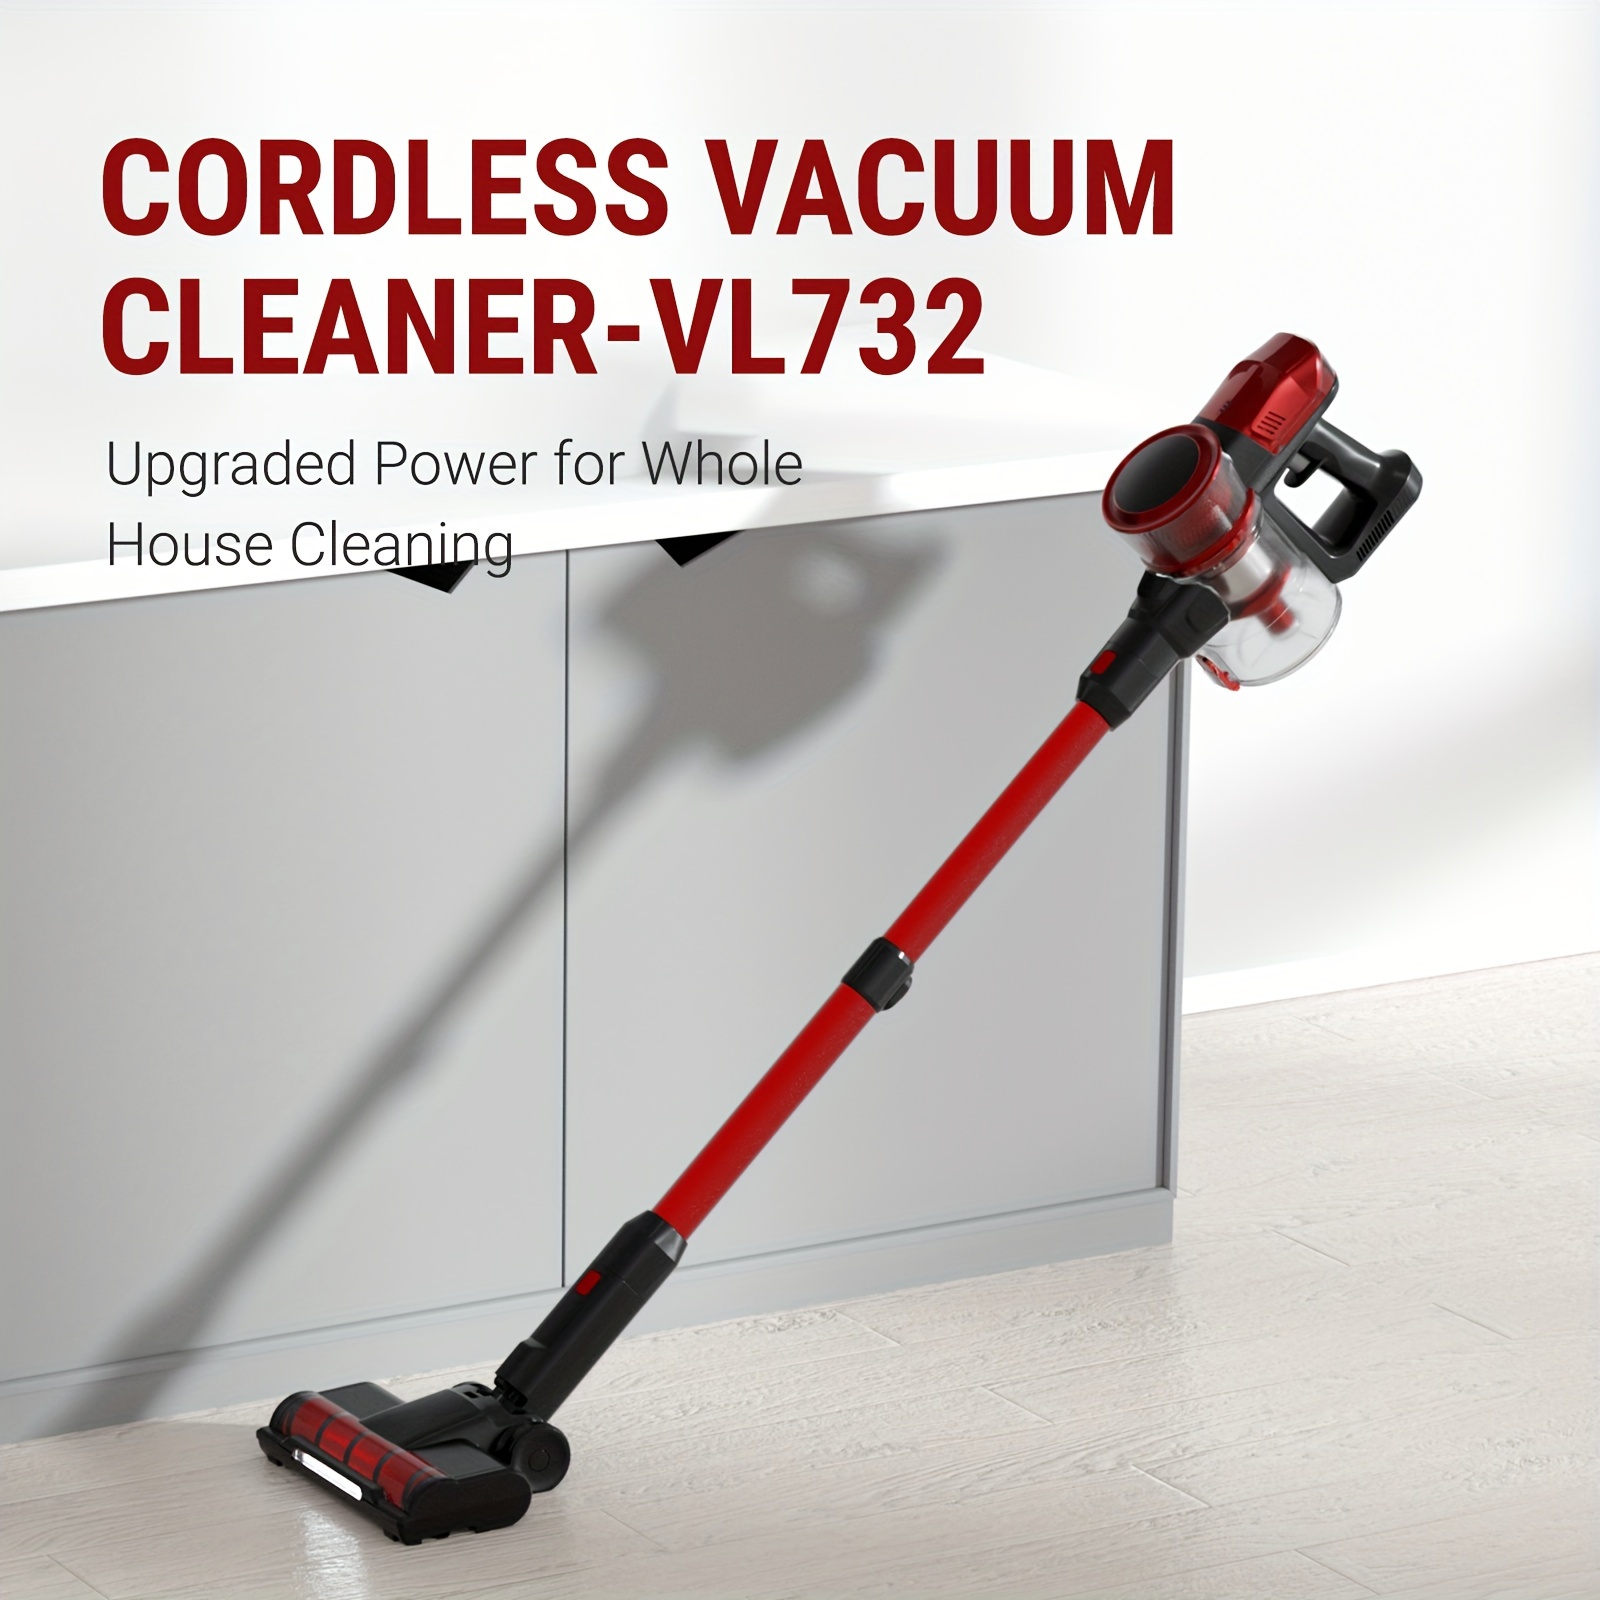 

Vaclife Cordless Vacuum Cleaner For Home, Rechargeable Stick Vacuum With Strong Suction For Pet Hair, Carpet And Hard Floor, 45-min Max Runtime